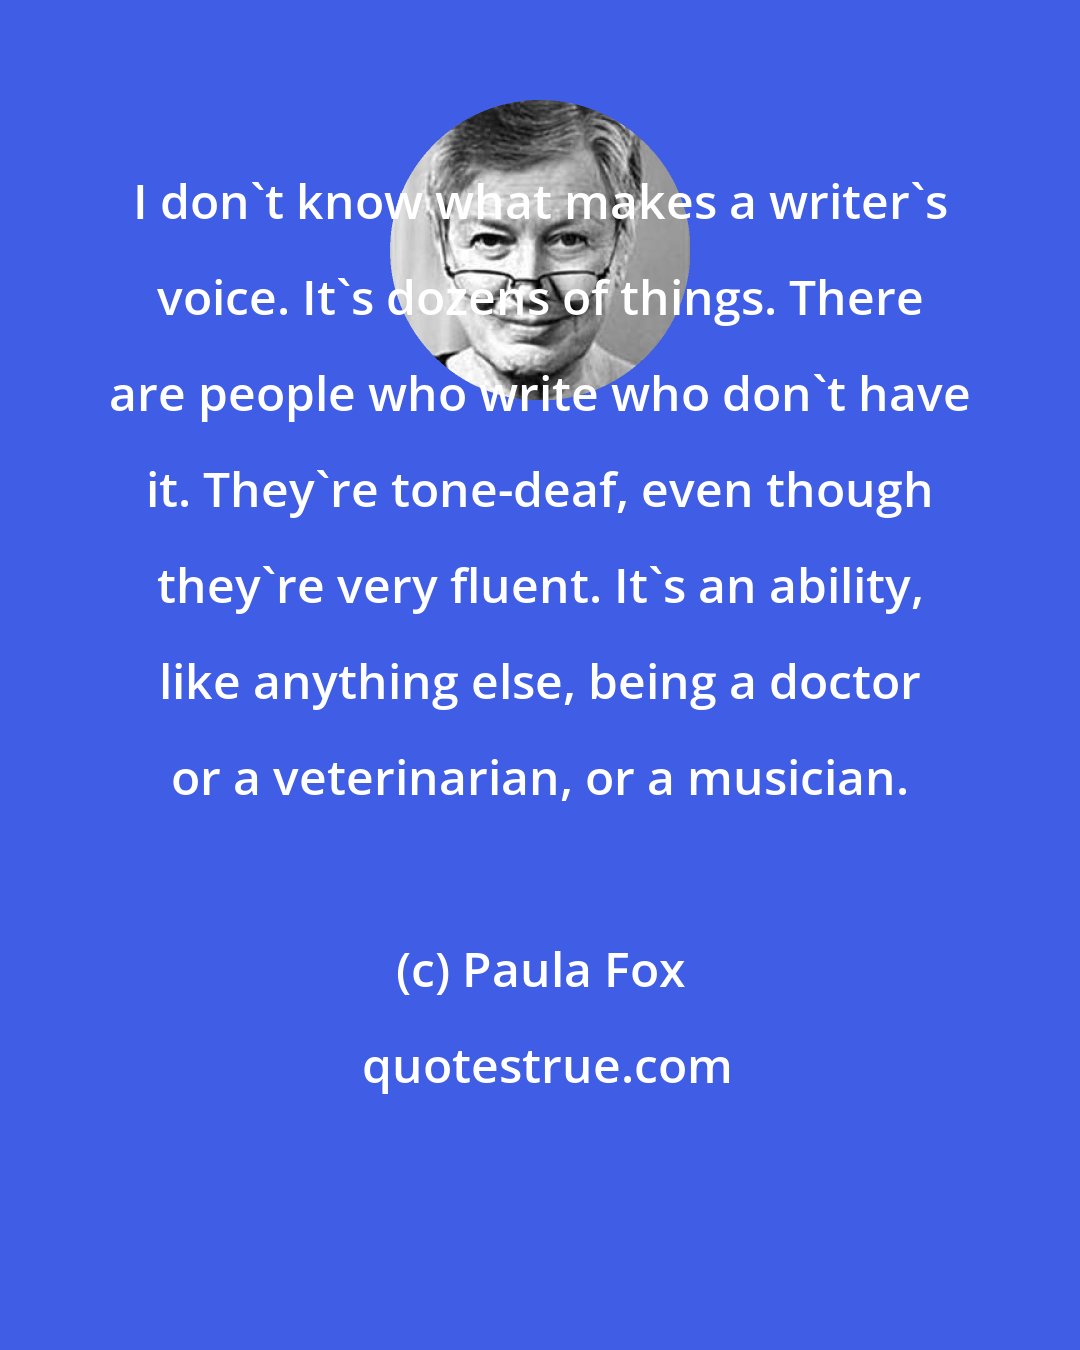 Paula Fox: I don't know what makes a writer's voice. It's dozens of things. There are people who write who don't have it. They're tone-deaf, even though they're very fluent. It's an ability, like anything else, being a doctor or a veterinarian, or a musician.